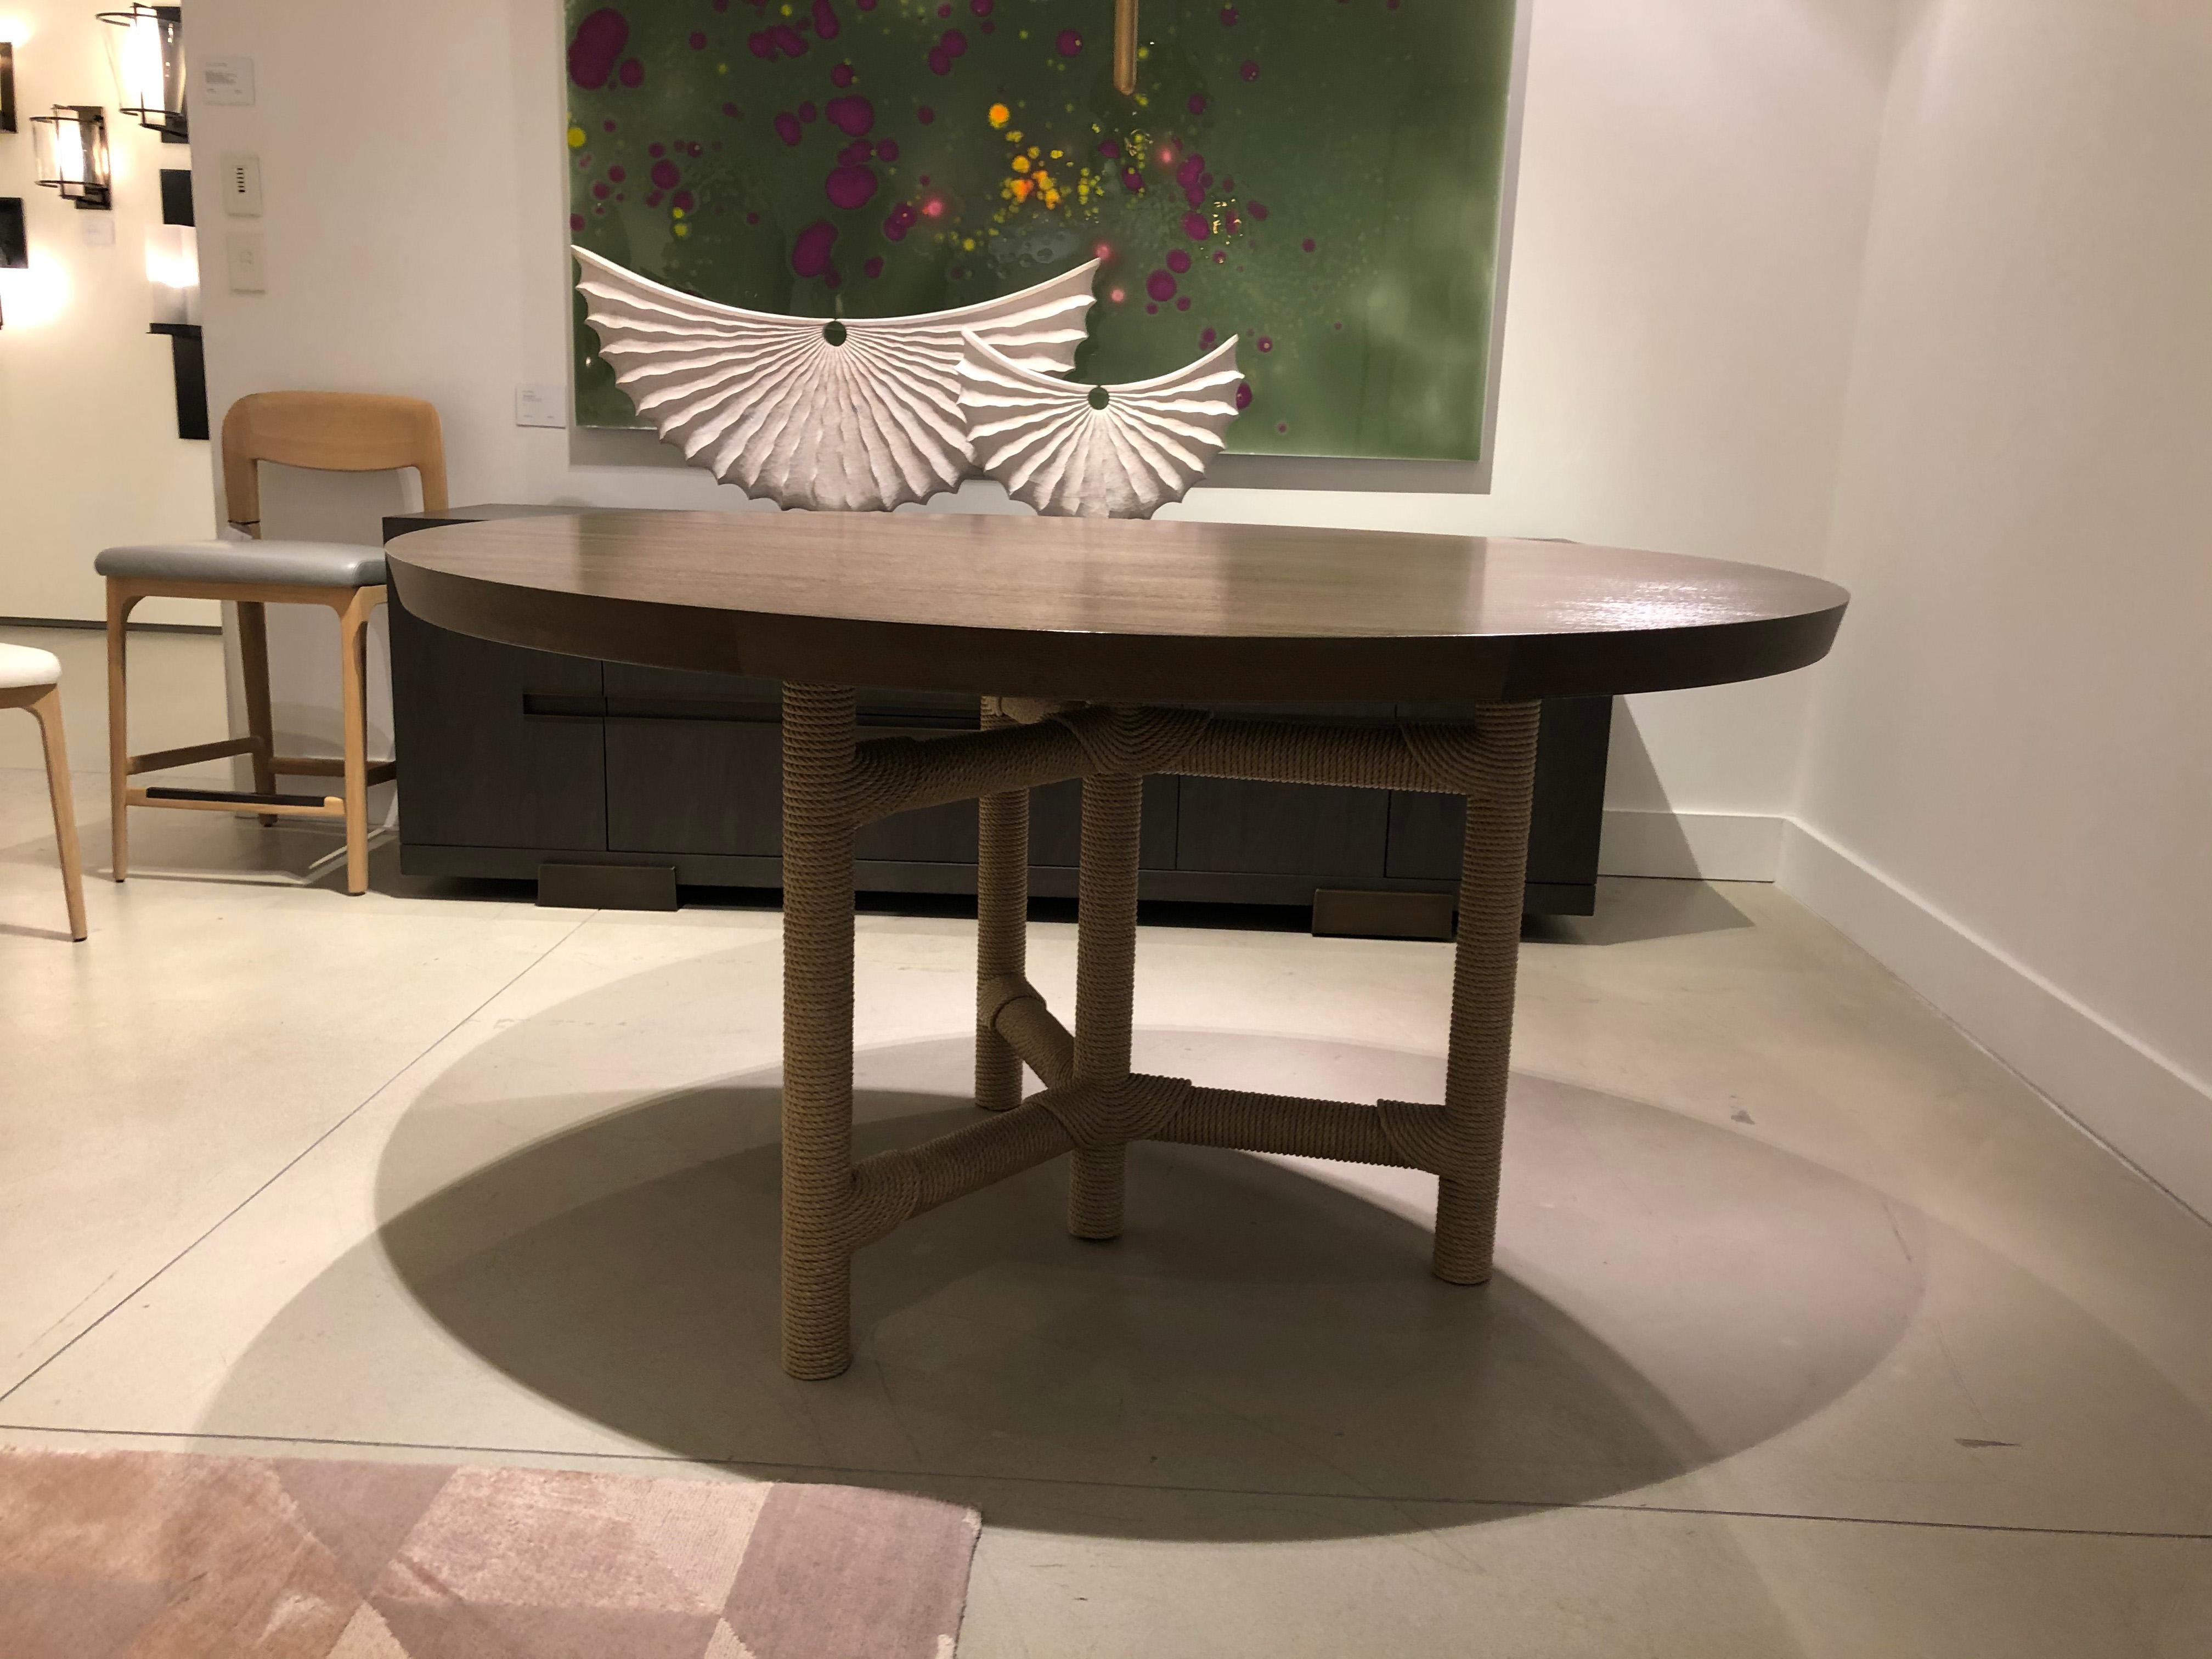 Modern HOLLY HUNT HH2010117 Afriba Table in Paldao 185 by Christian Astuguevieille For Sale